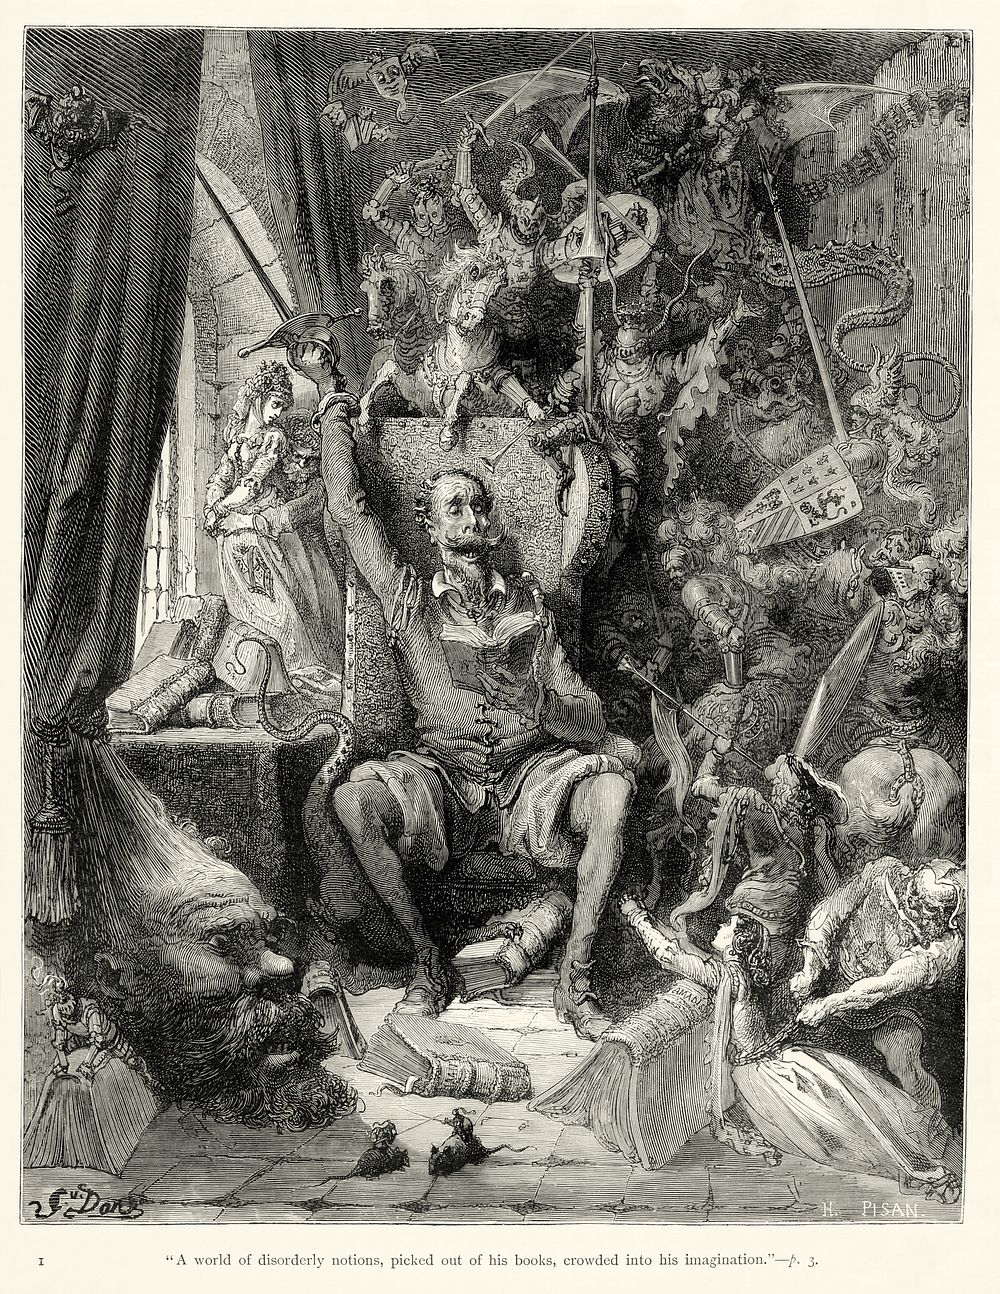 Plate I of Gustave Doré's illustrations to Miguel de Cervantes' Don Quixote. From Chapter I.The ordering of images in this…